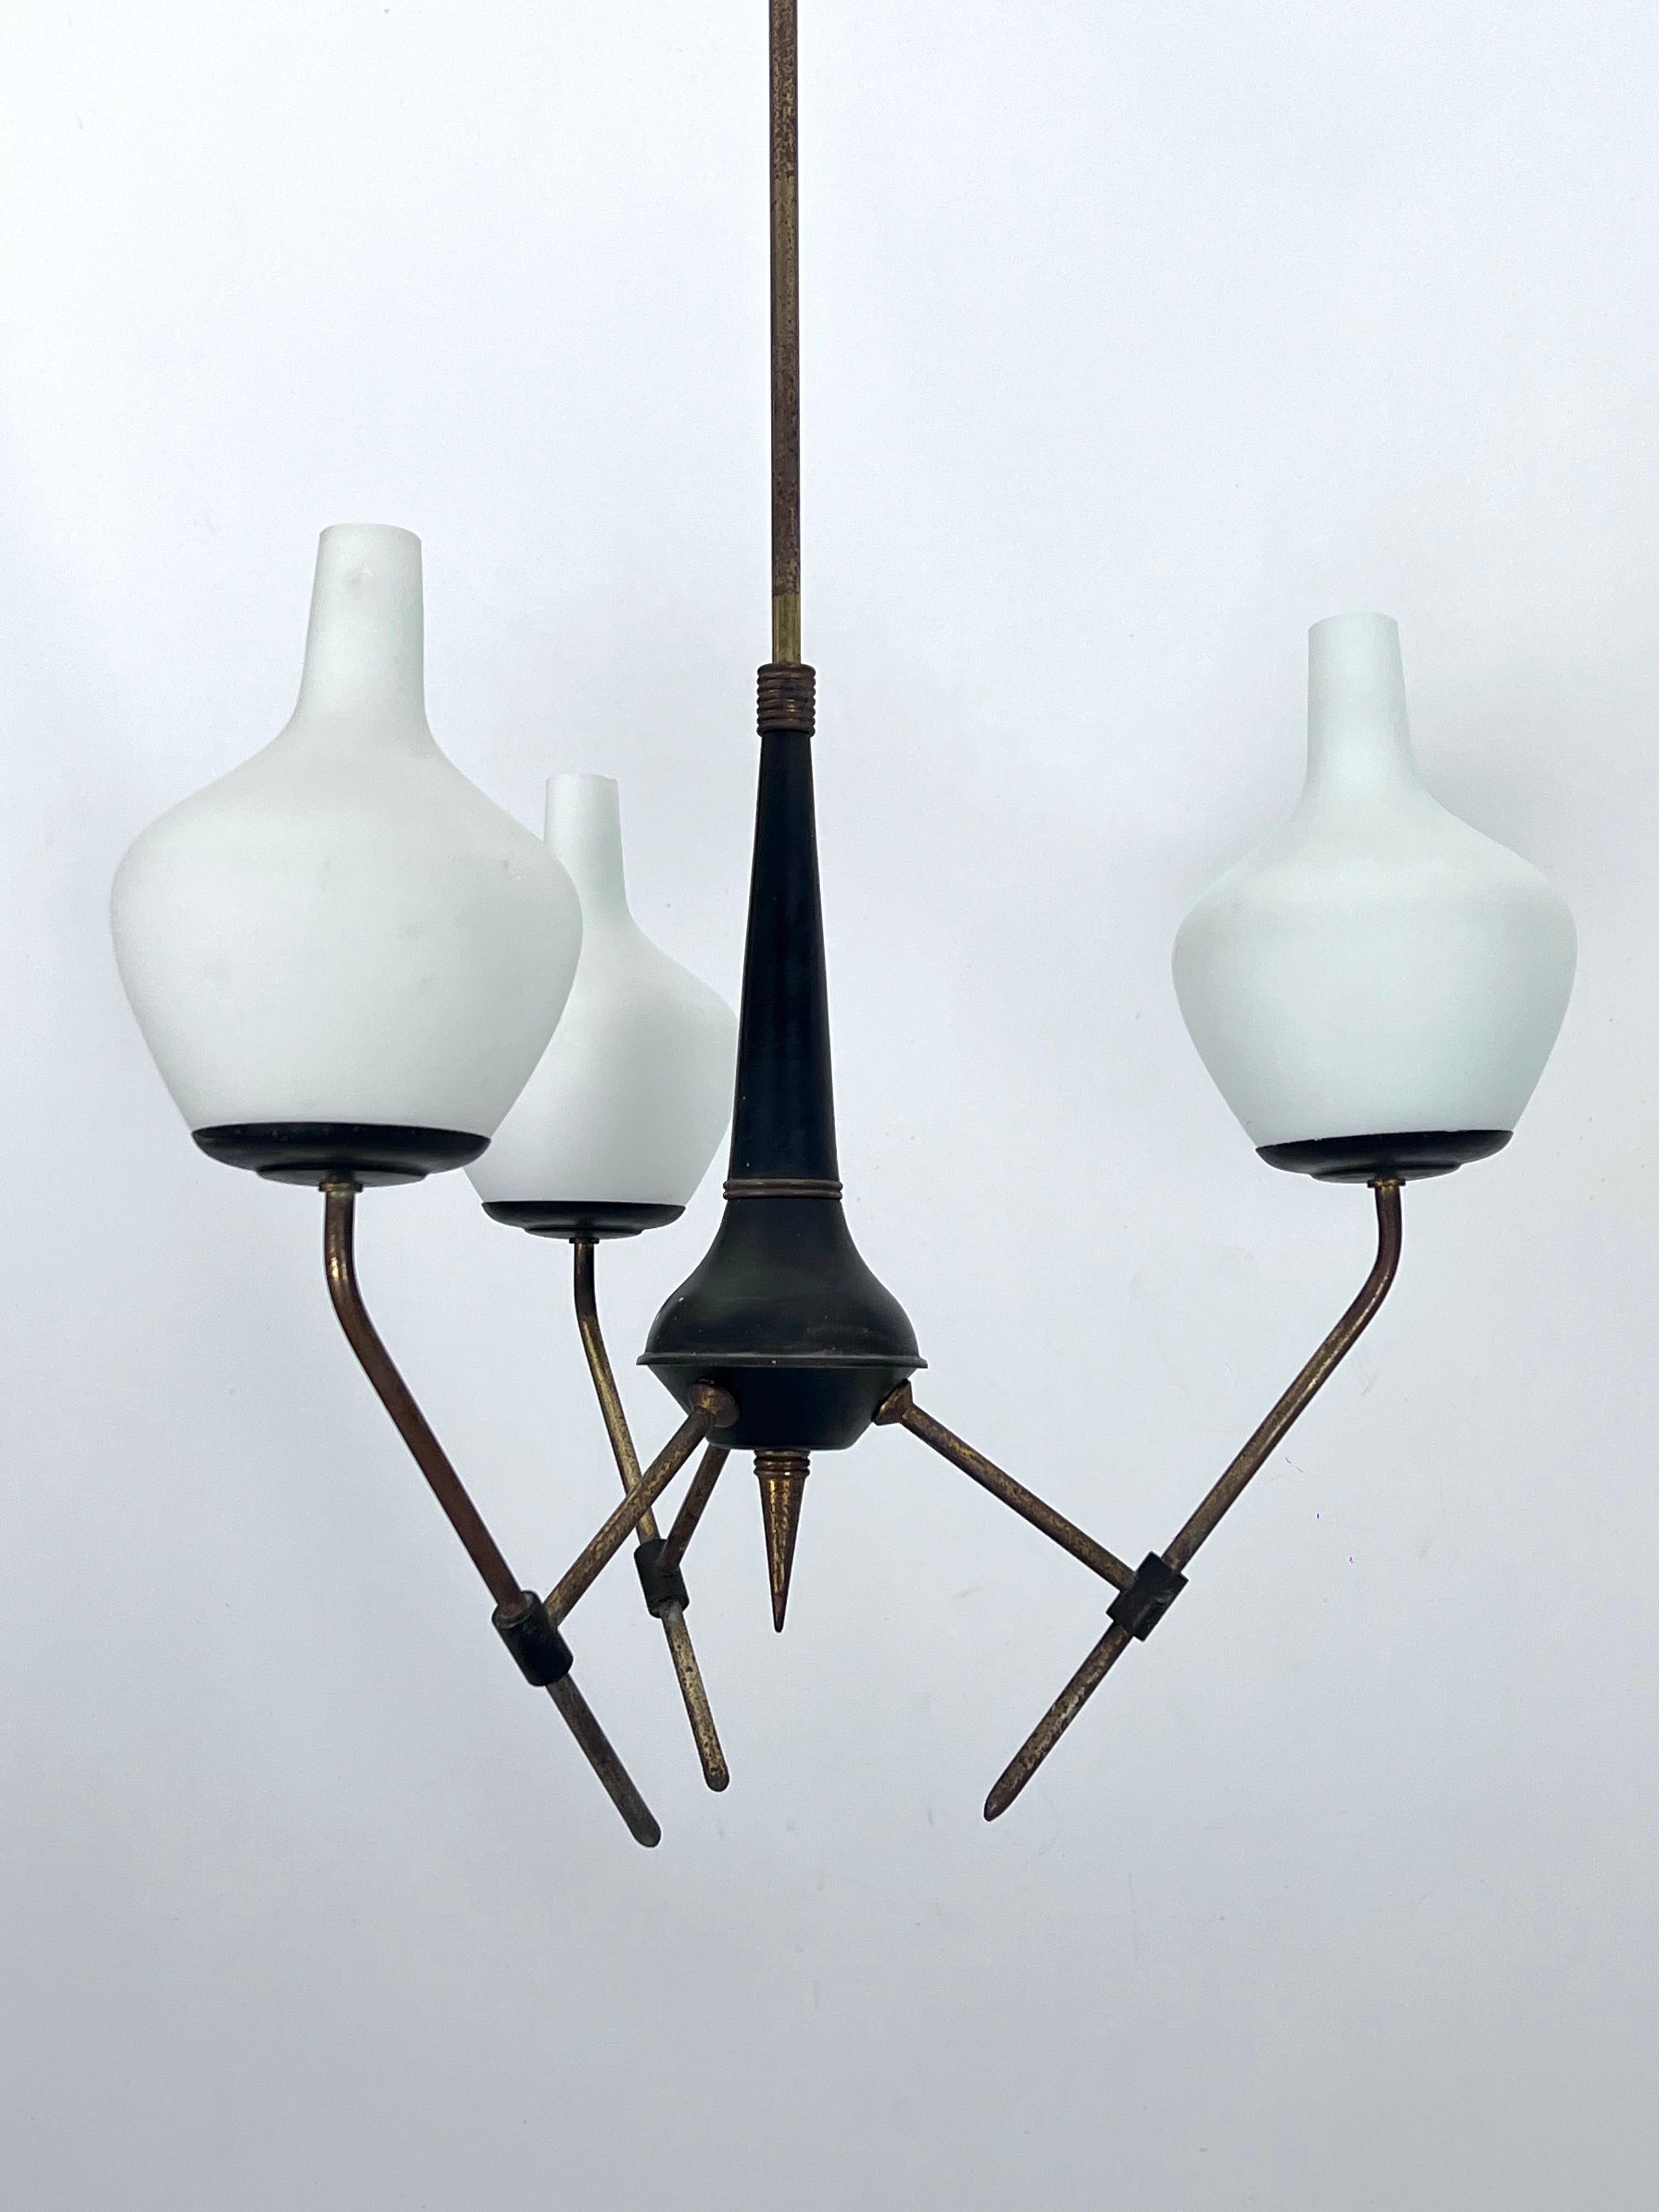 Mid-century three light chandelier in brass and black lacquered metal with opaline glasses. Fair vintage condition with oxidation on the brass and small chips on two glasses as shown in pictures. It mounts three sockets for E14 bulbs. Full working